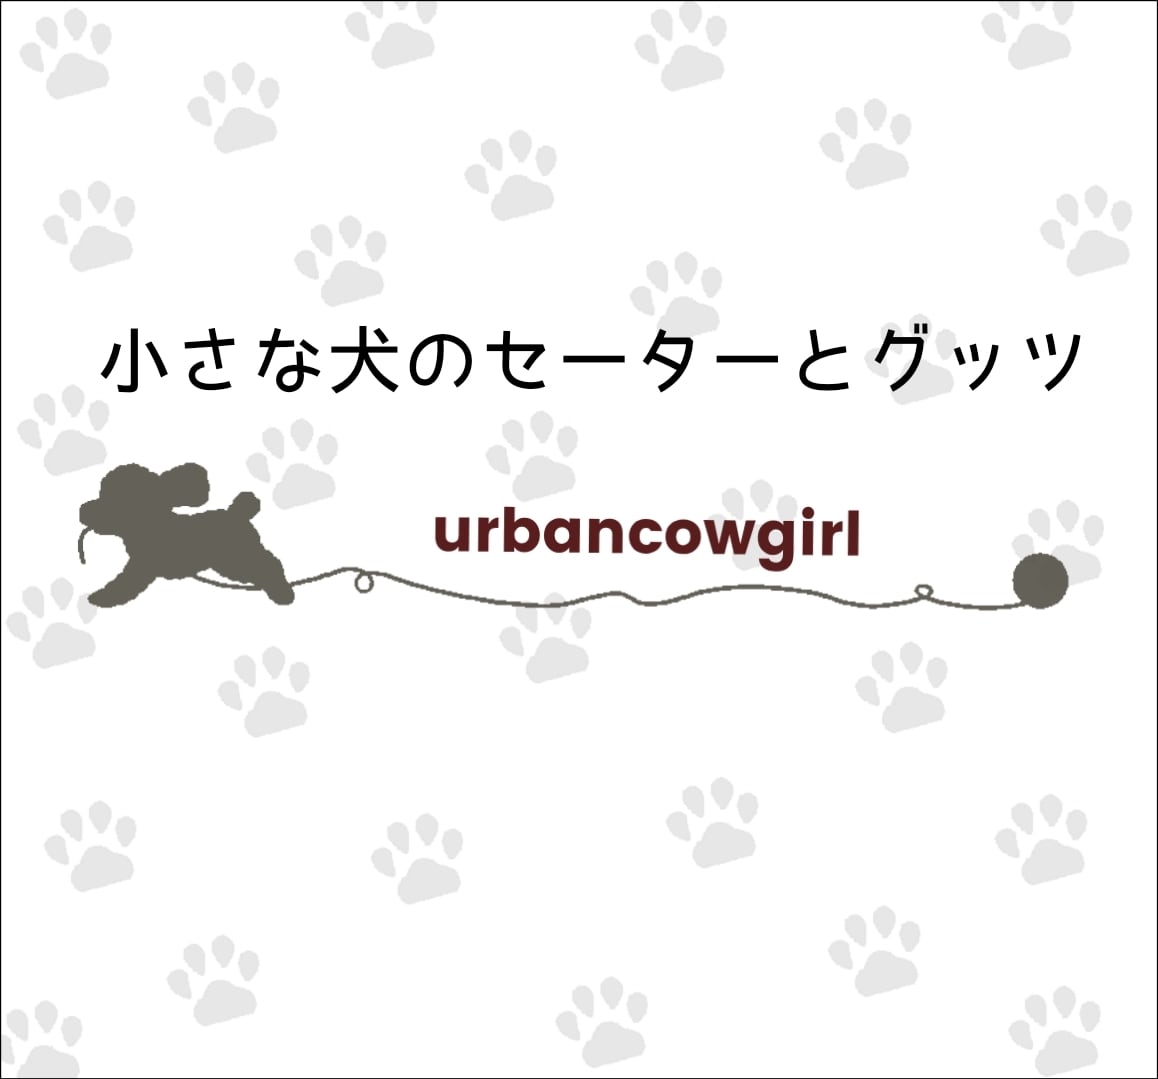 urbancowgirl_official